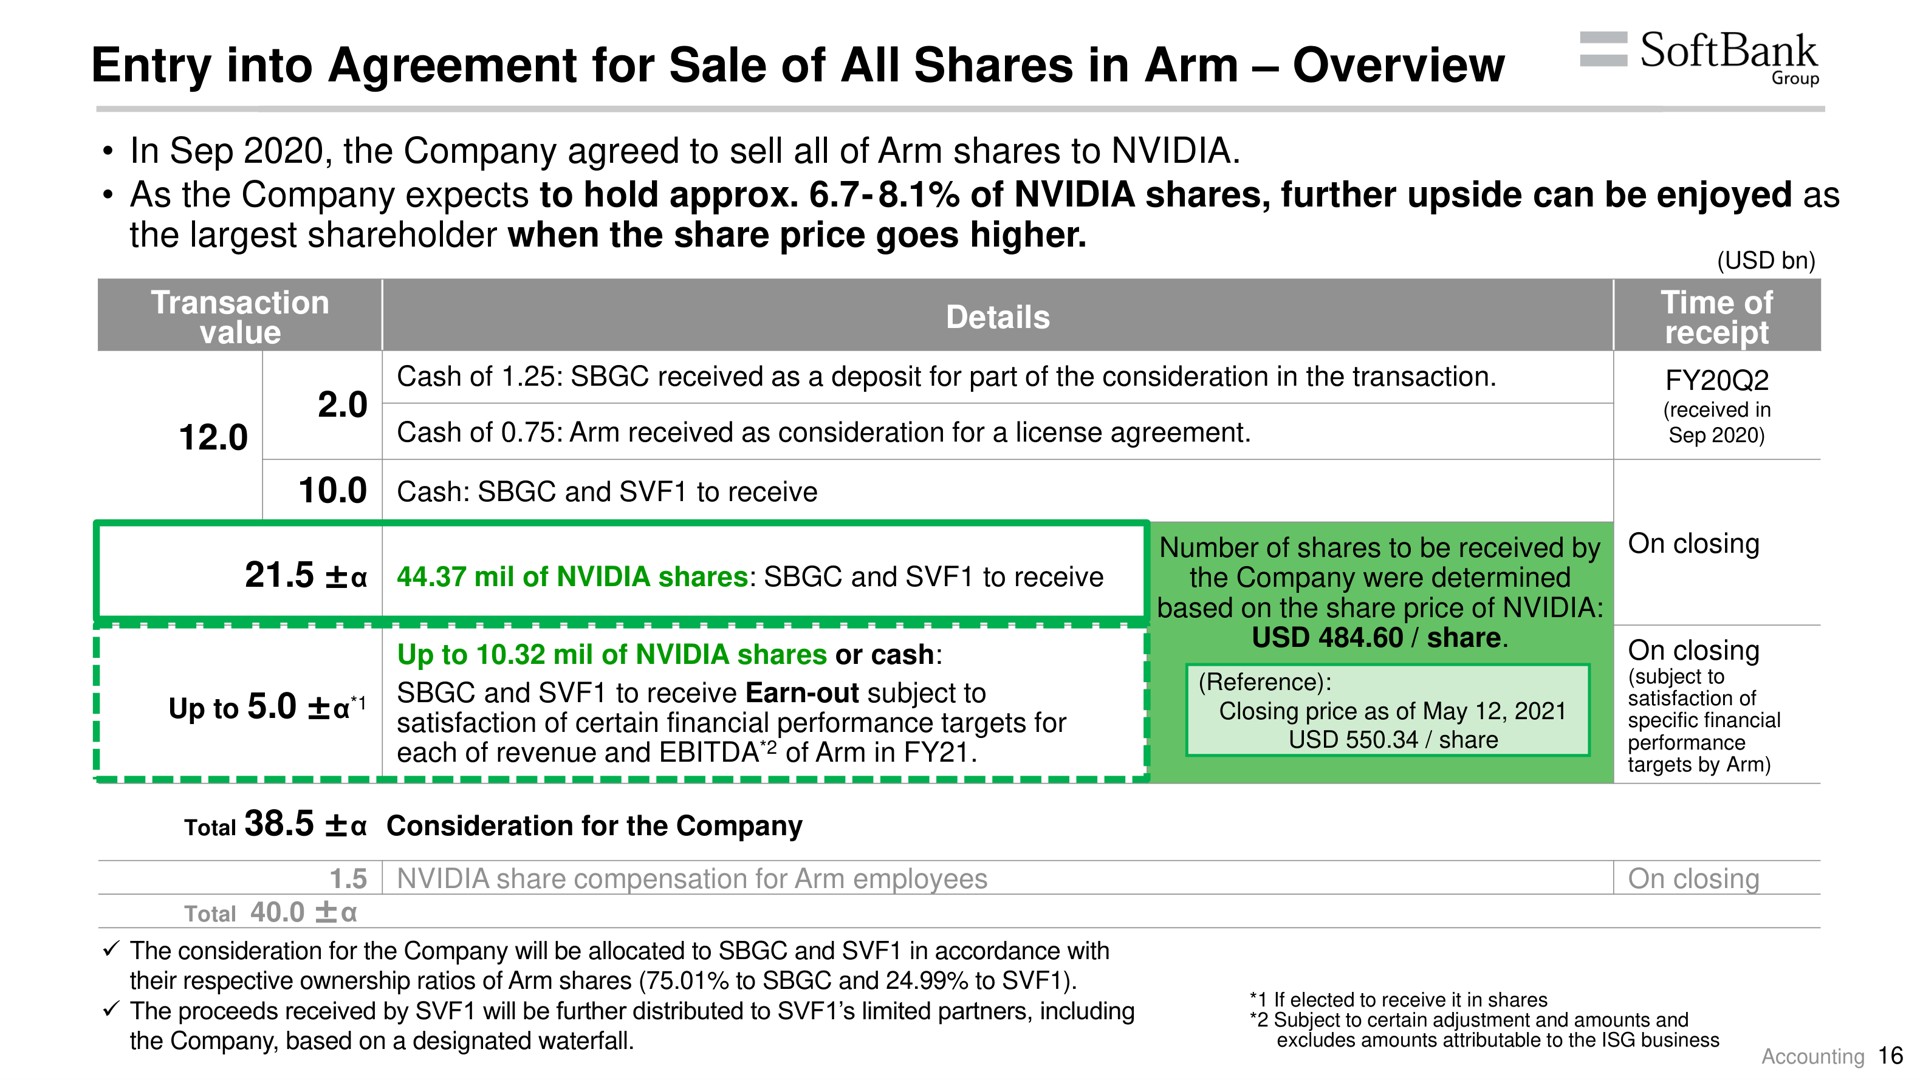 entry into agreement for sale of all shares in arm overview | SoftBank